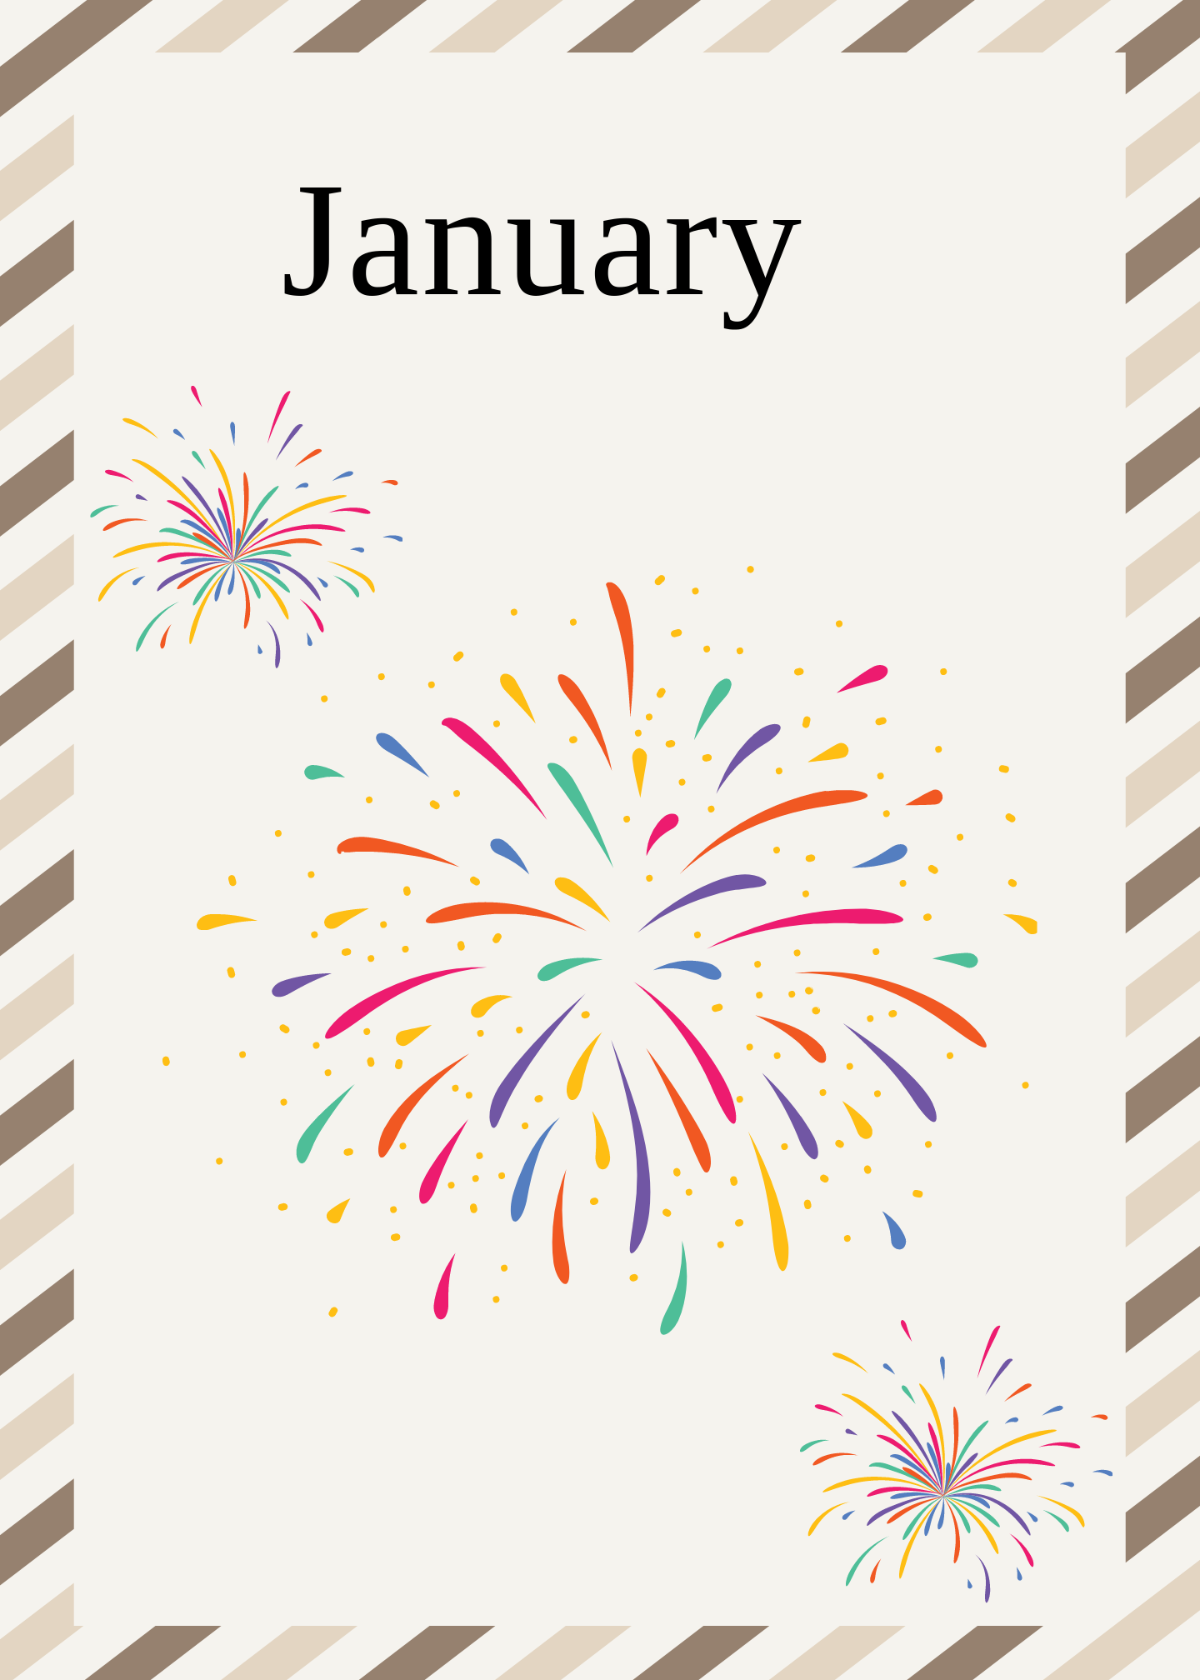 Free Months of The Year Flashcards Template